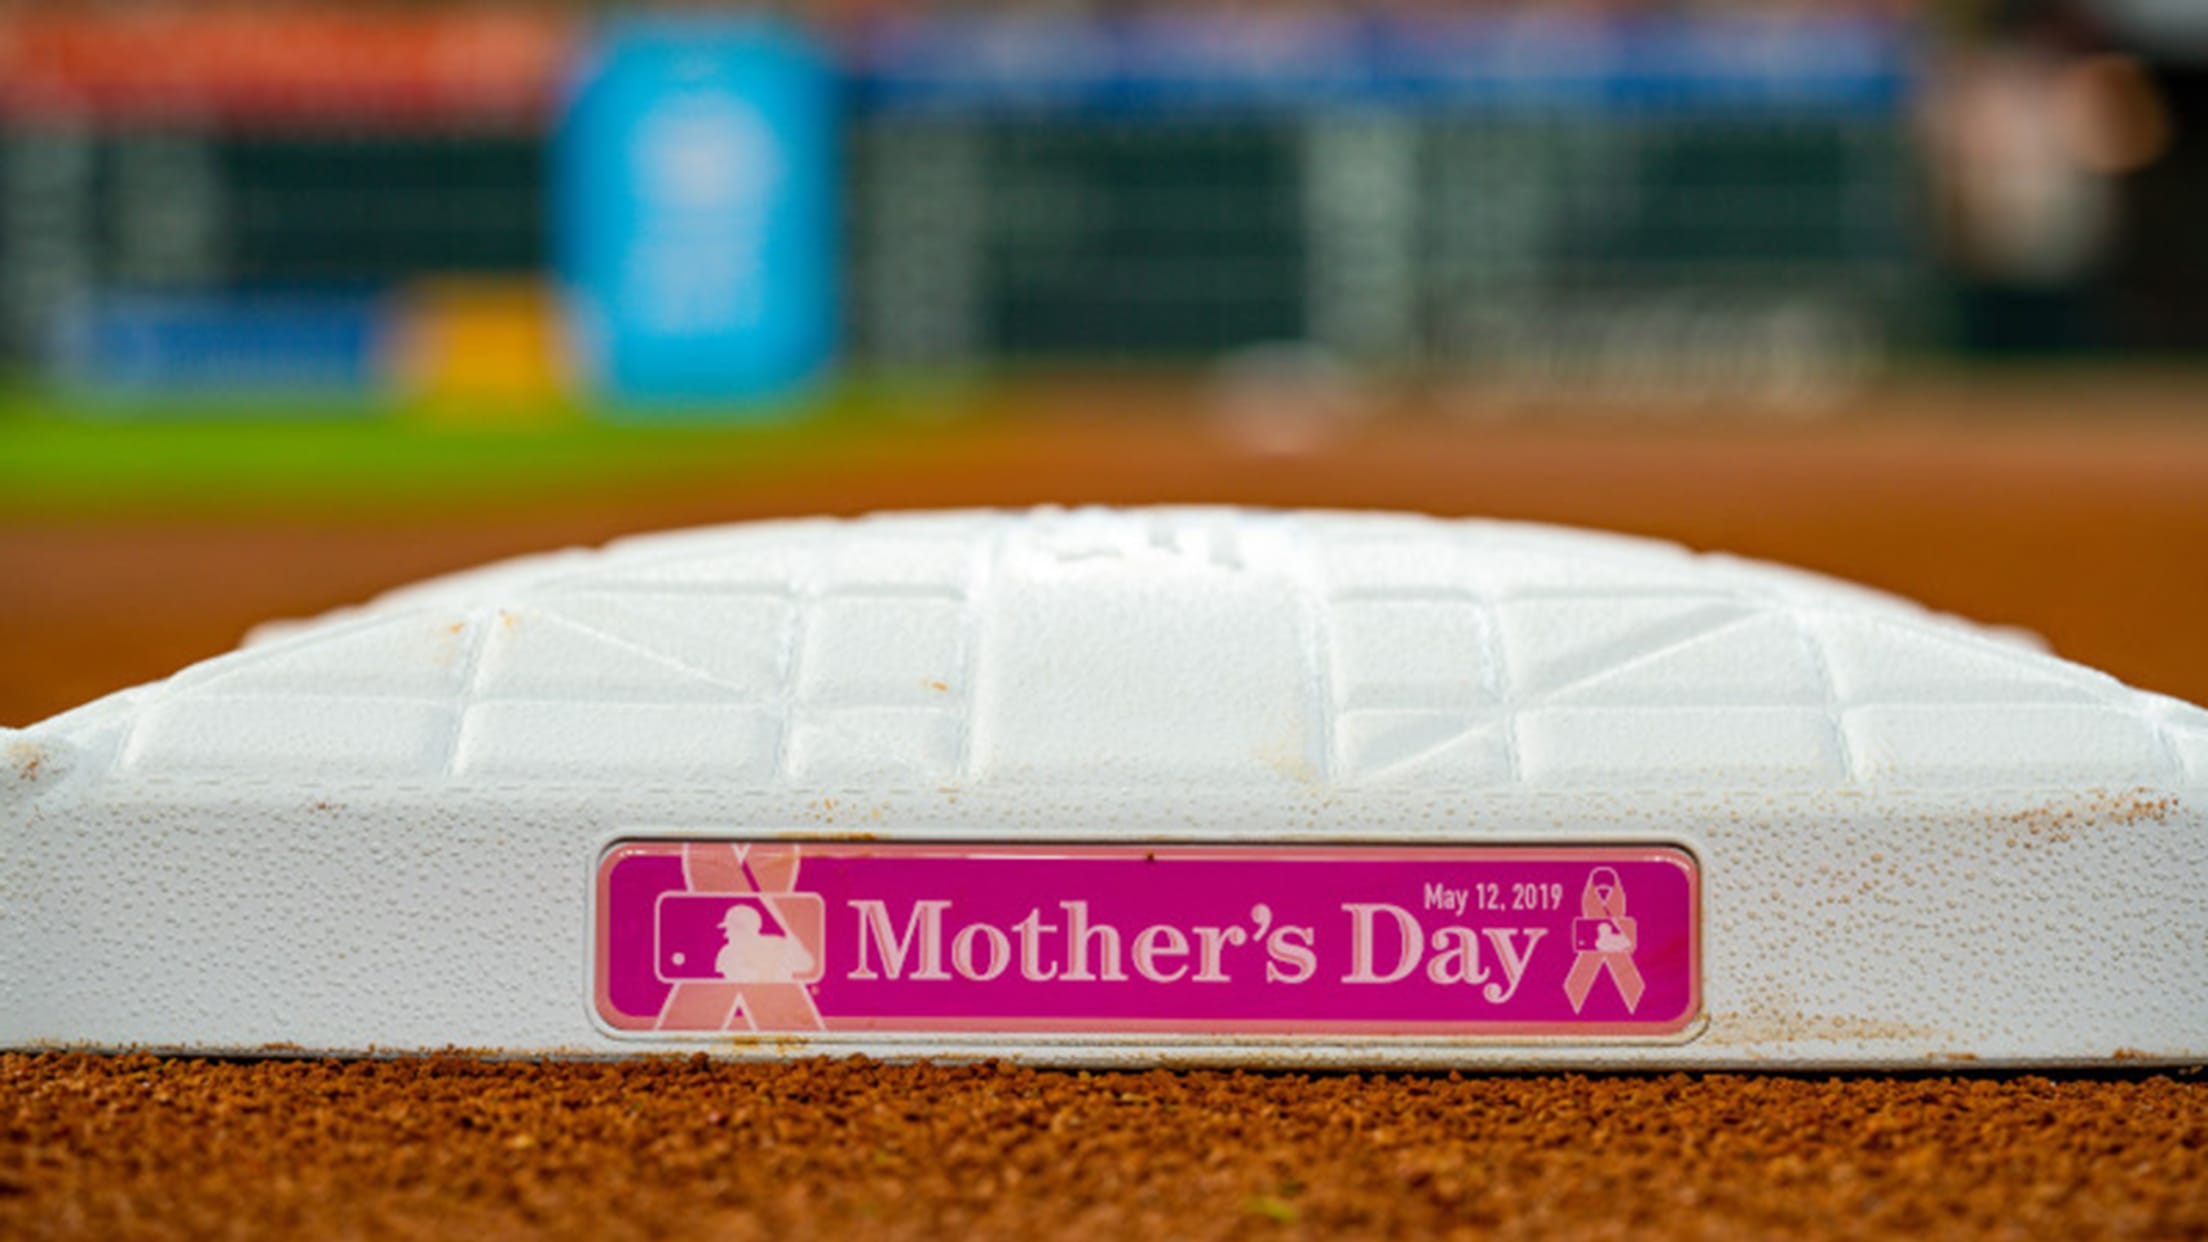 Houston Astros on X: This year's @KendraScott Mother's Day add-on package  features a necklace and an Astros jersey! Available for just $50, this gift  is perfect for any #Astros mom. 🎟